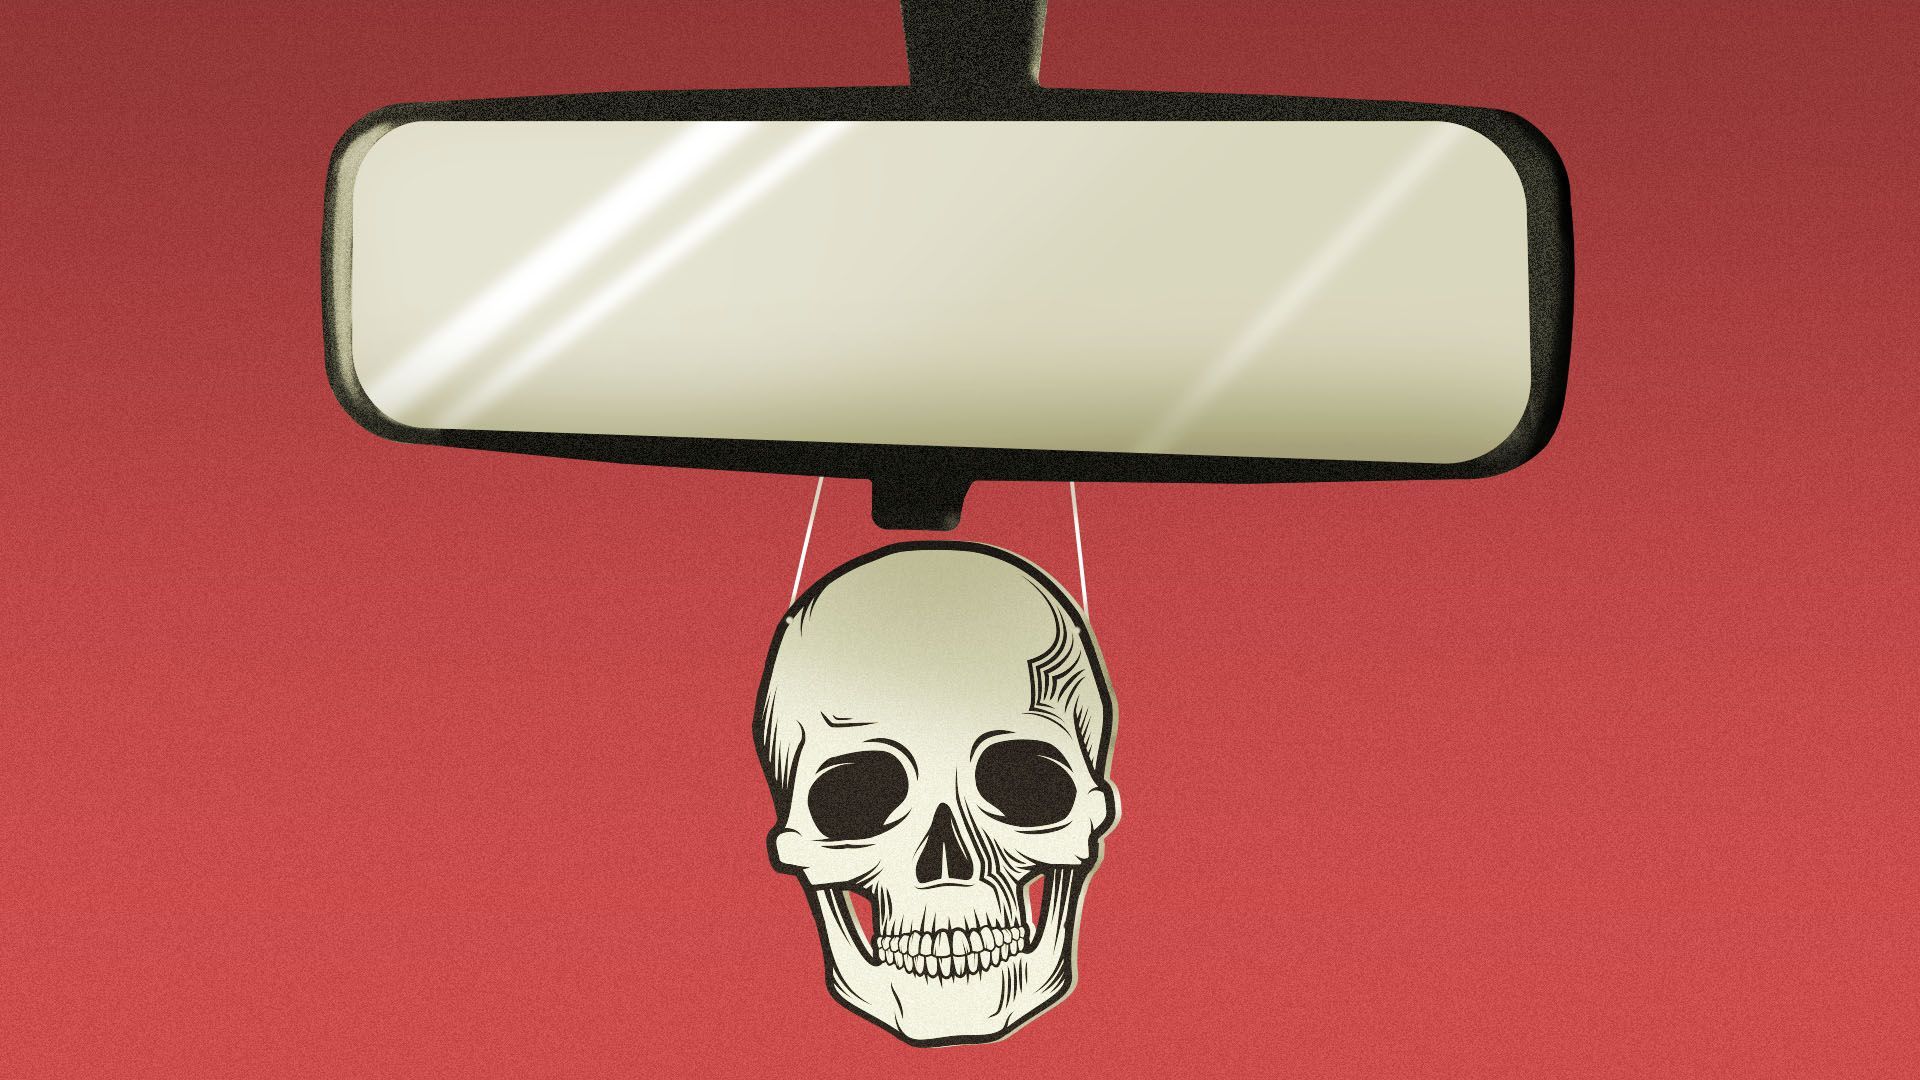  Illustration of skull decoration hanging from a car’s rear view mirror.